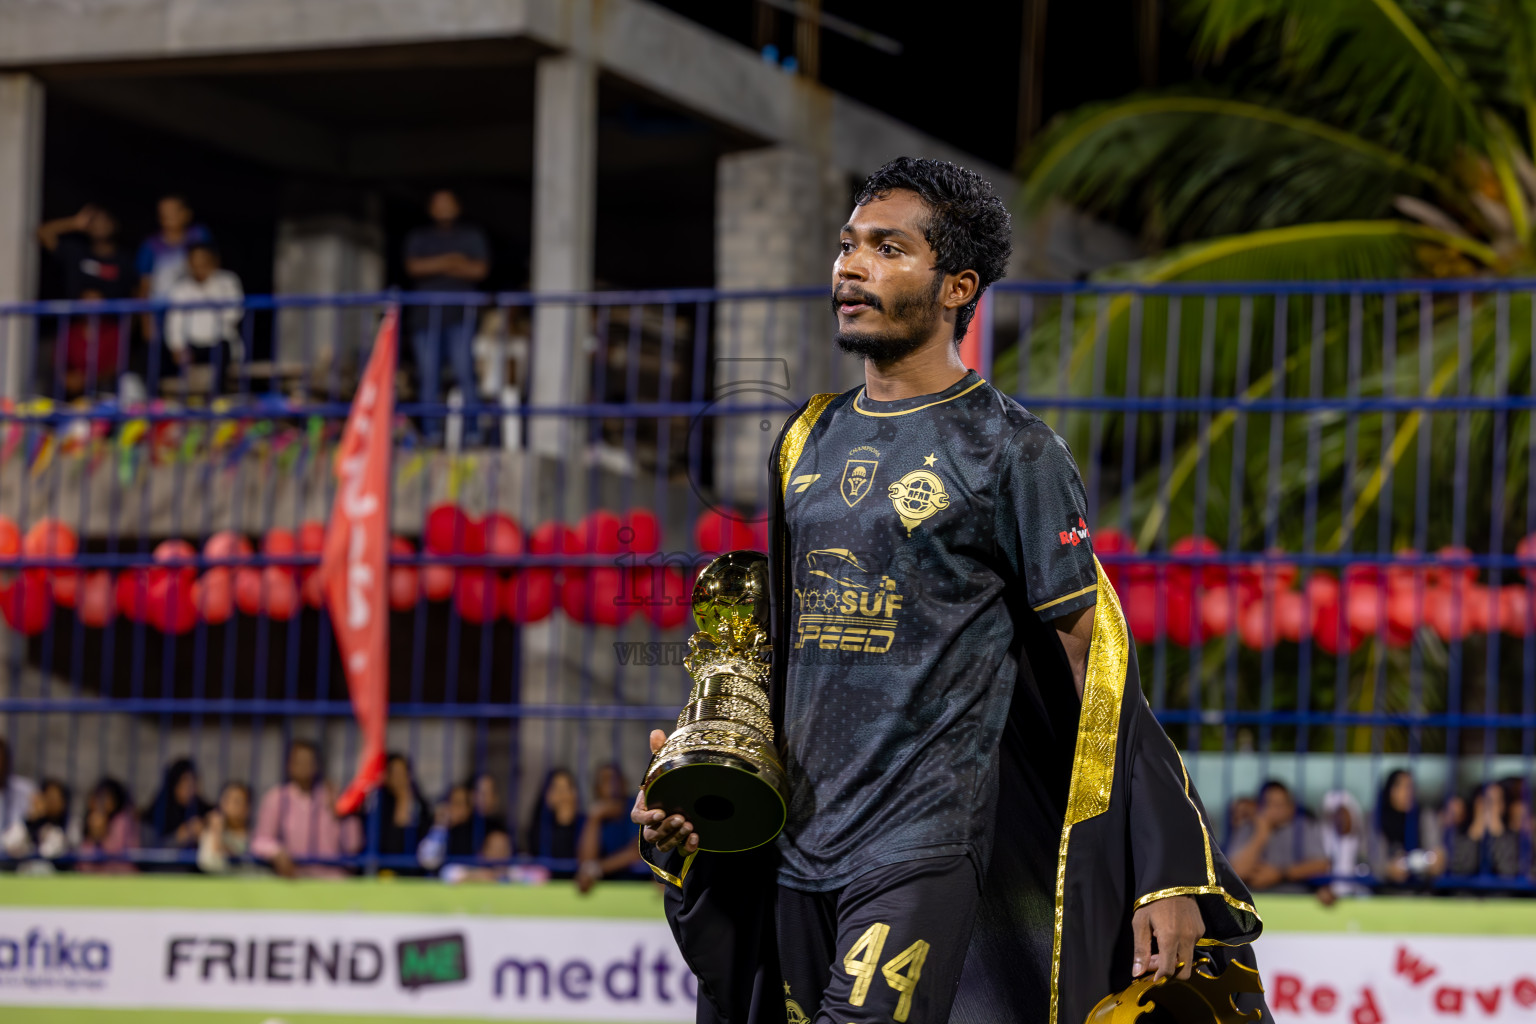 CC Sports Club vs Afro SC in the final of Eydhafushi Futsal Cup 2024 was held on Wednesday , 17th April 2024, in B Eydhafushi, Maldives
Photos: Ismail Thoriq / images.mv